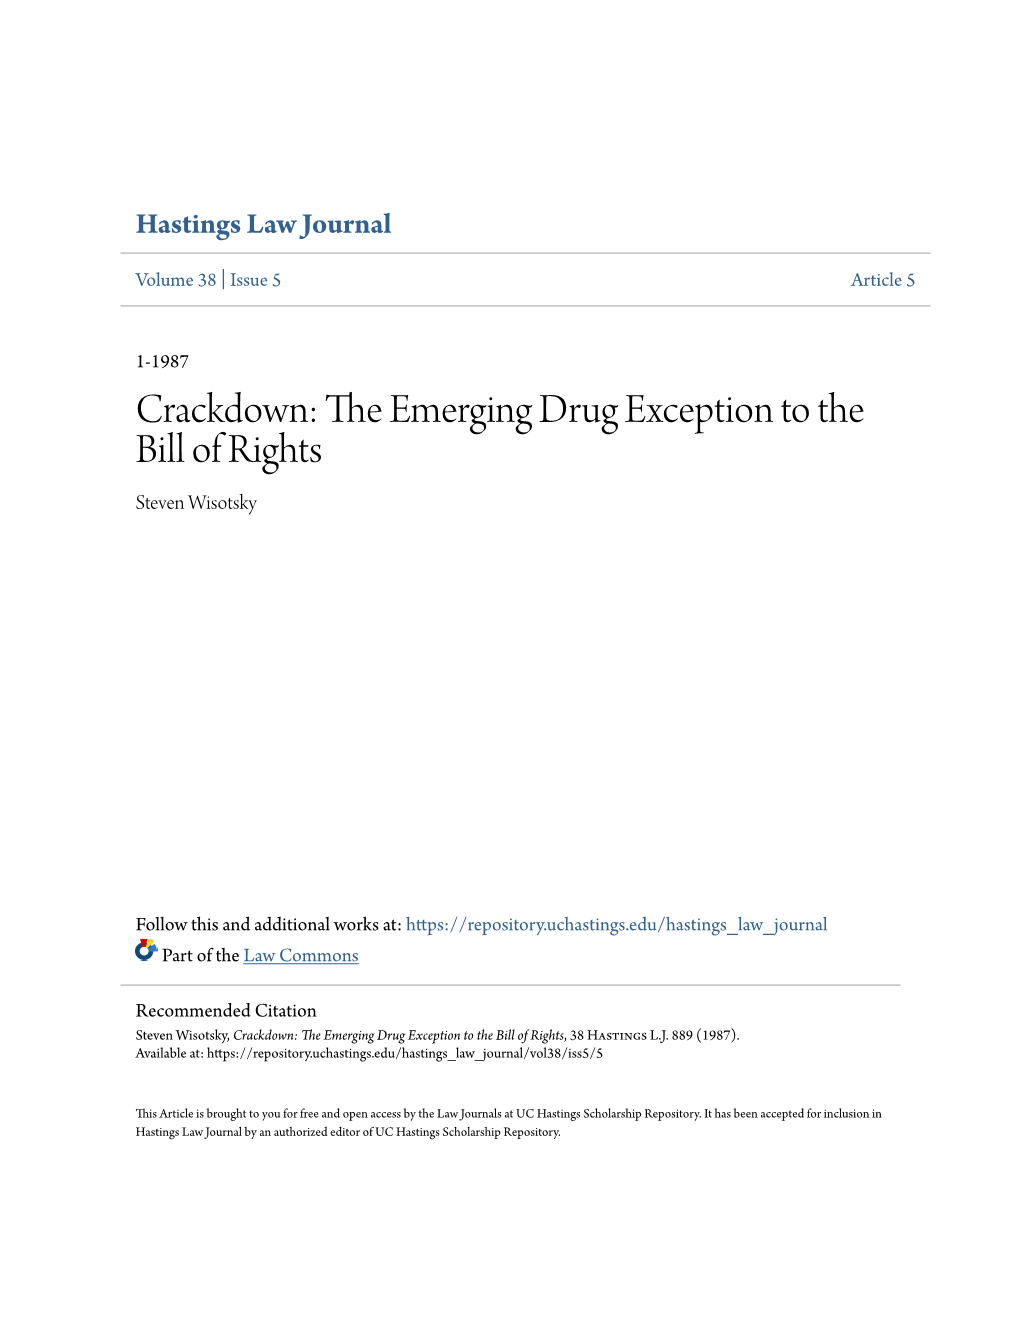 Crackdown: the Emerging Drug Exception to the Bill of Rights, 38 Hastings L.J